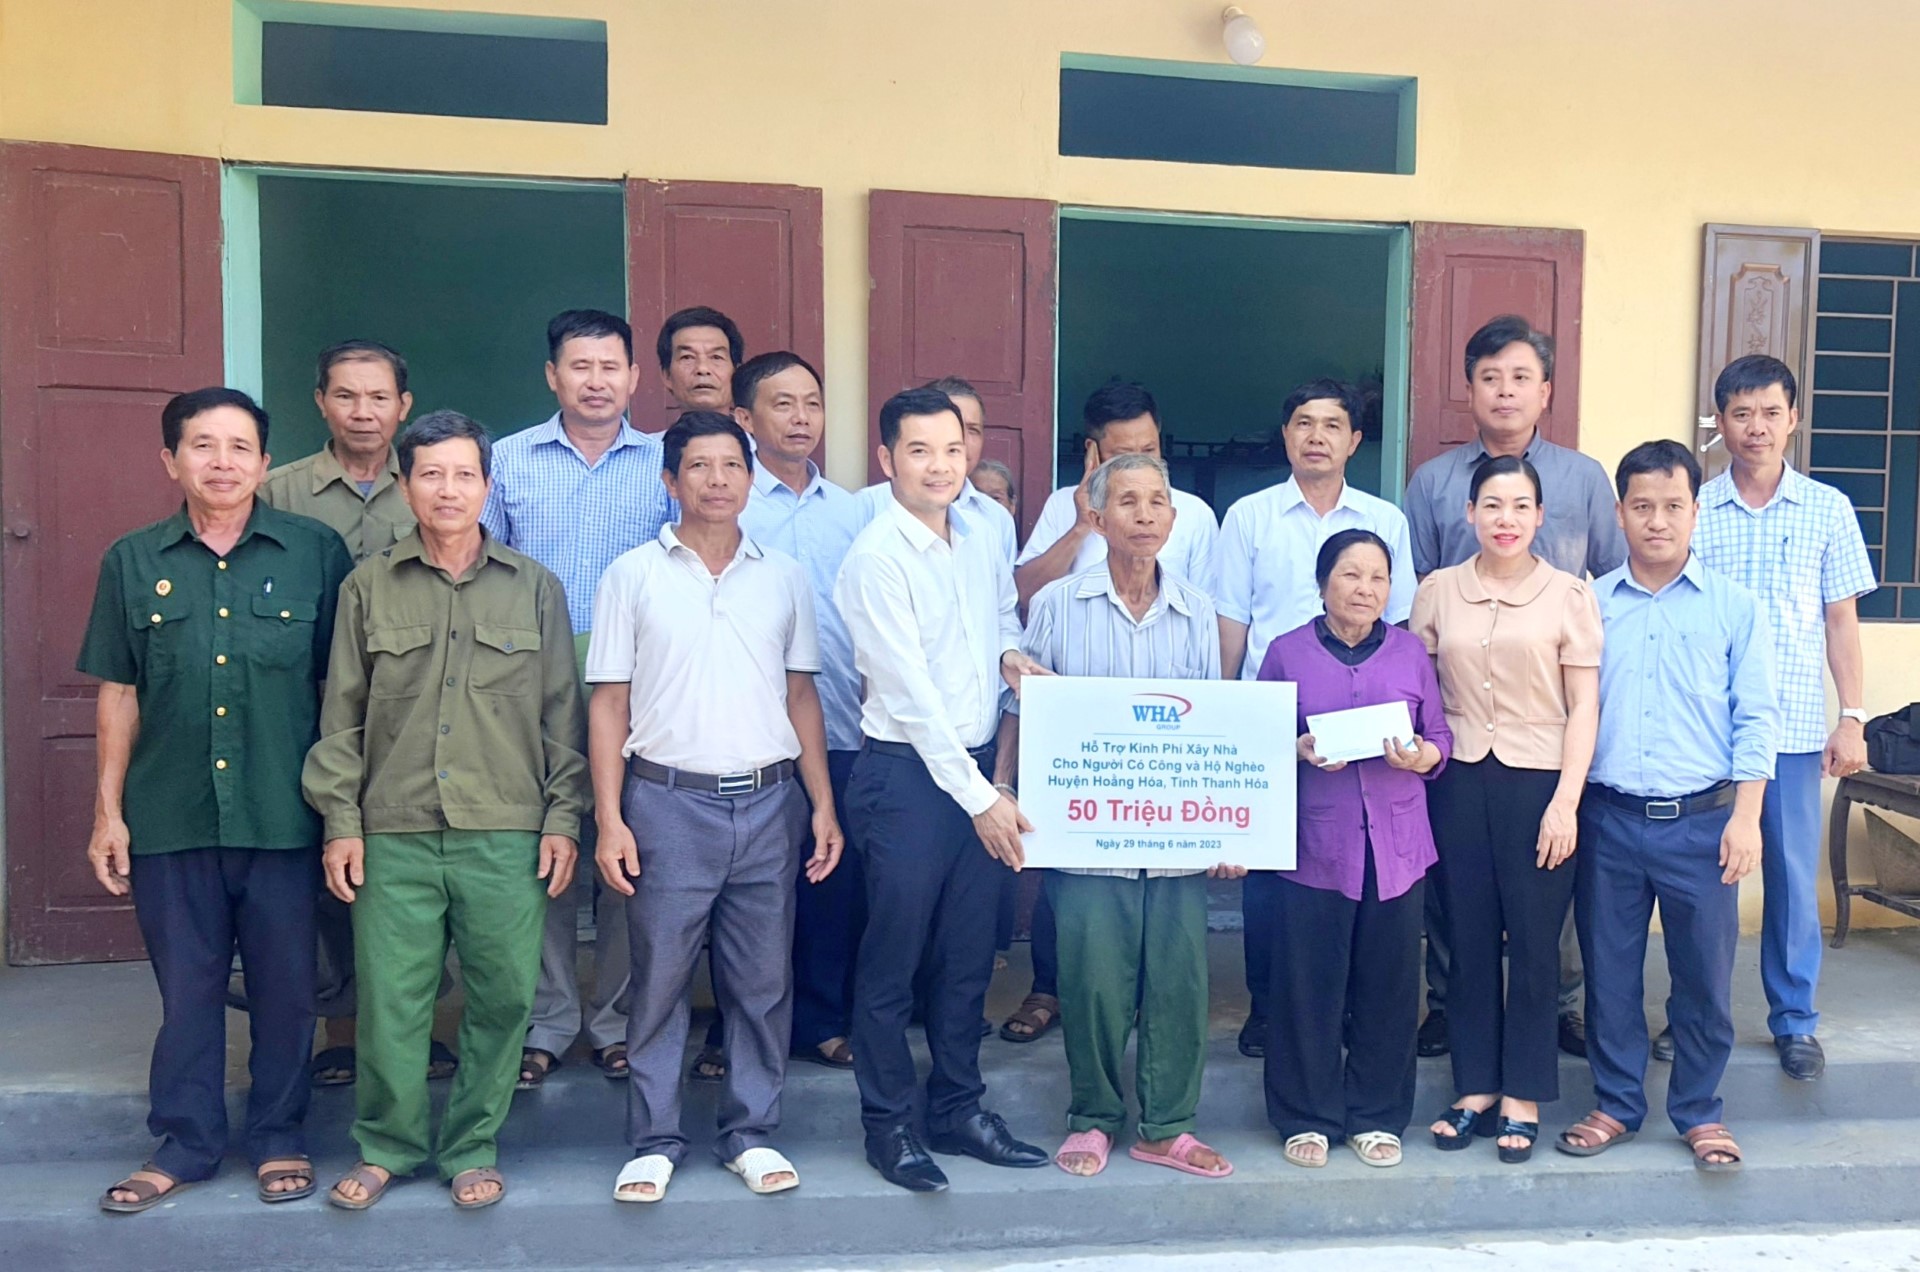 WHA Viet Nam supports to build residential houses for revolutionary contributor and poor households in Hoang Hoa district, Thanh Hoa province.